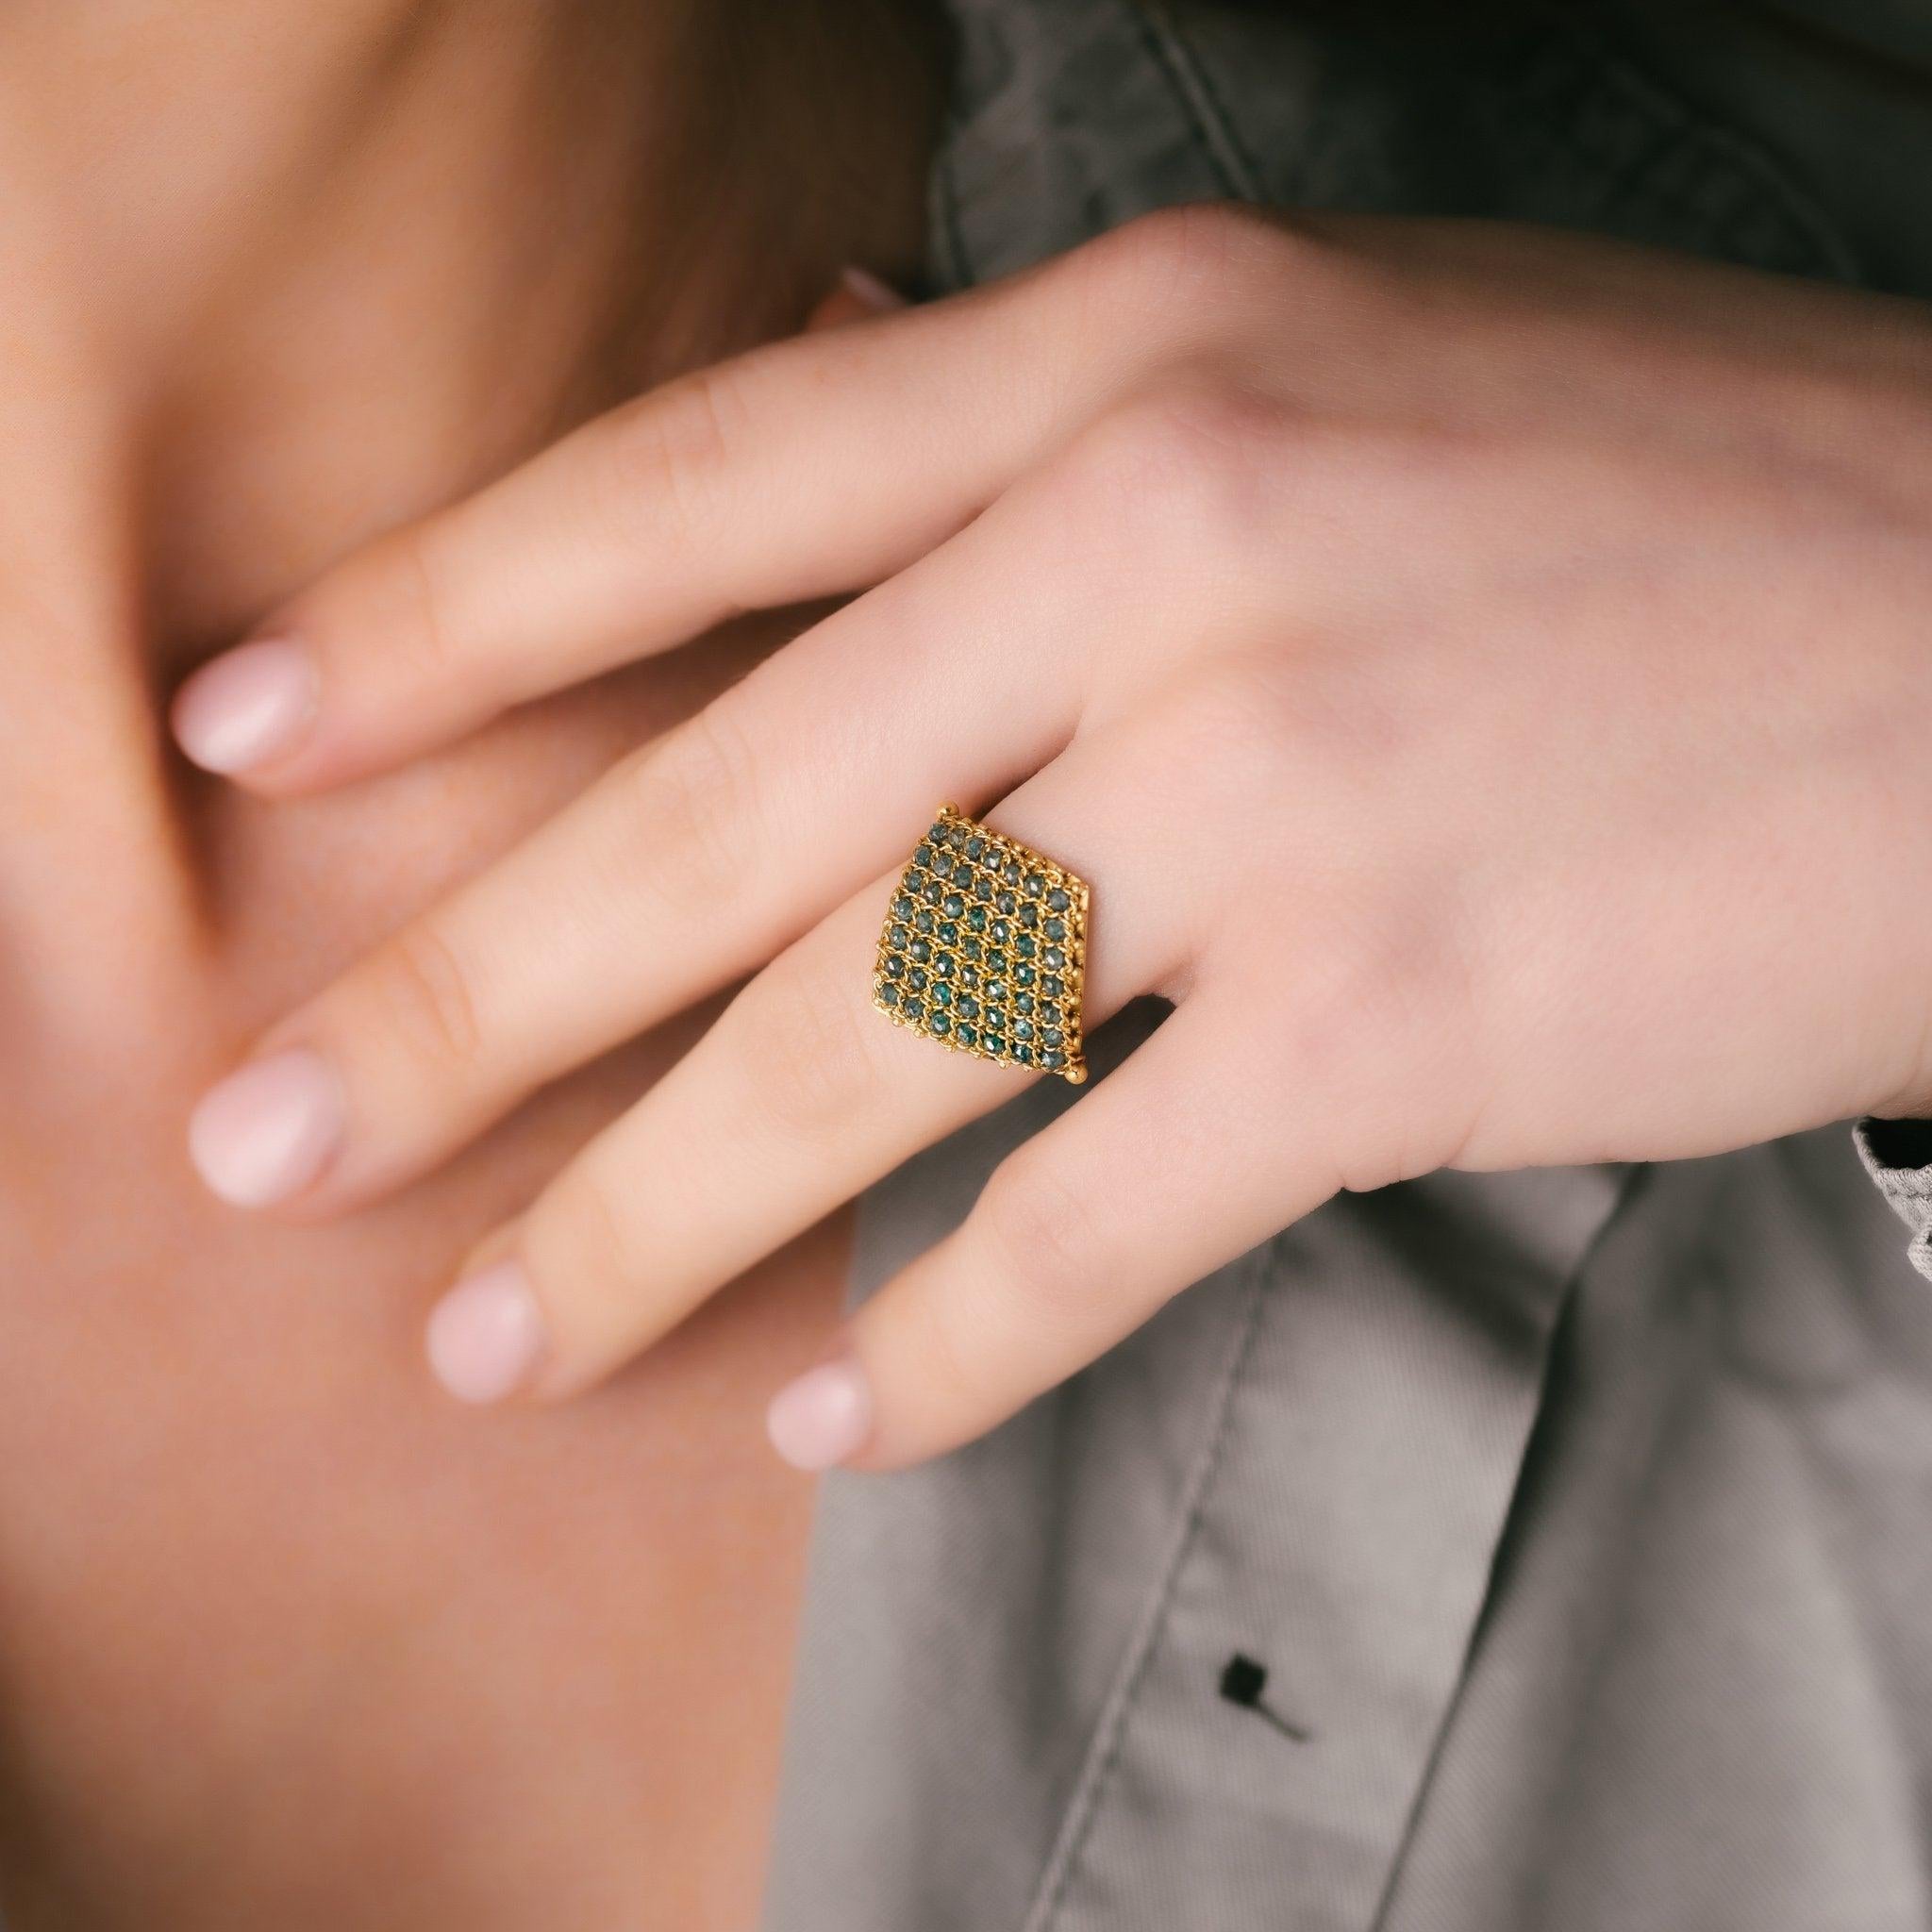 This eye-catching ring combines expert jewelry craftsmanship and traditional weaving techniques to create an unforgettable expanse of yellow gold chain hand woven with alluring Blue Diamonds. The result is an intricate textile-like swath of lustrous